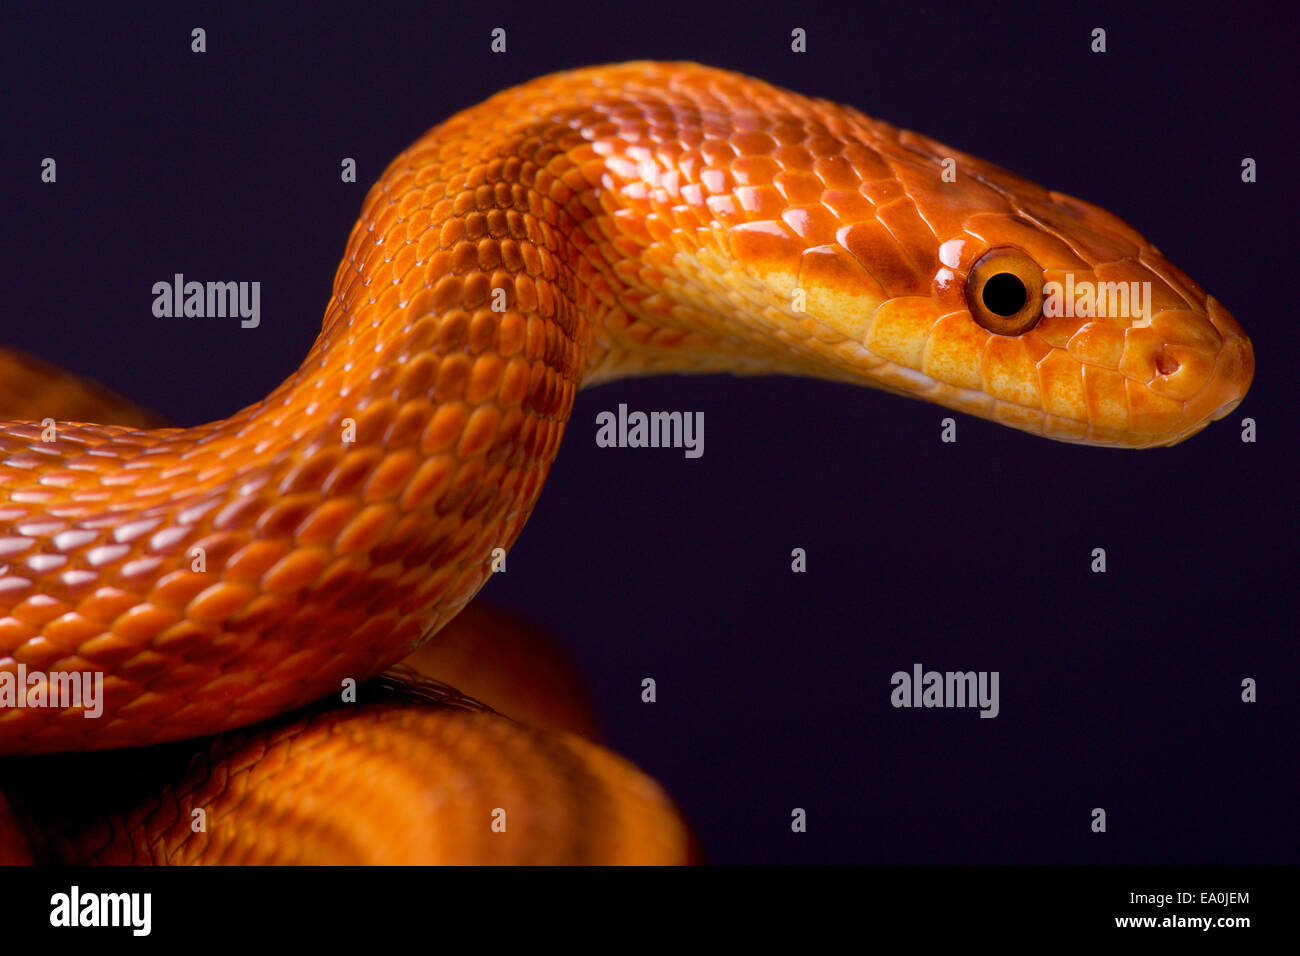 Dione's rat snake / Elaphe dione Stock Photo